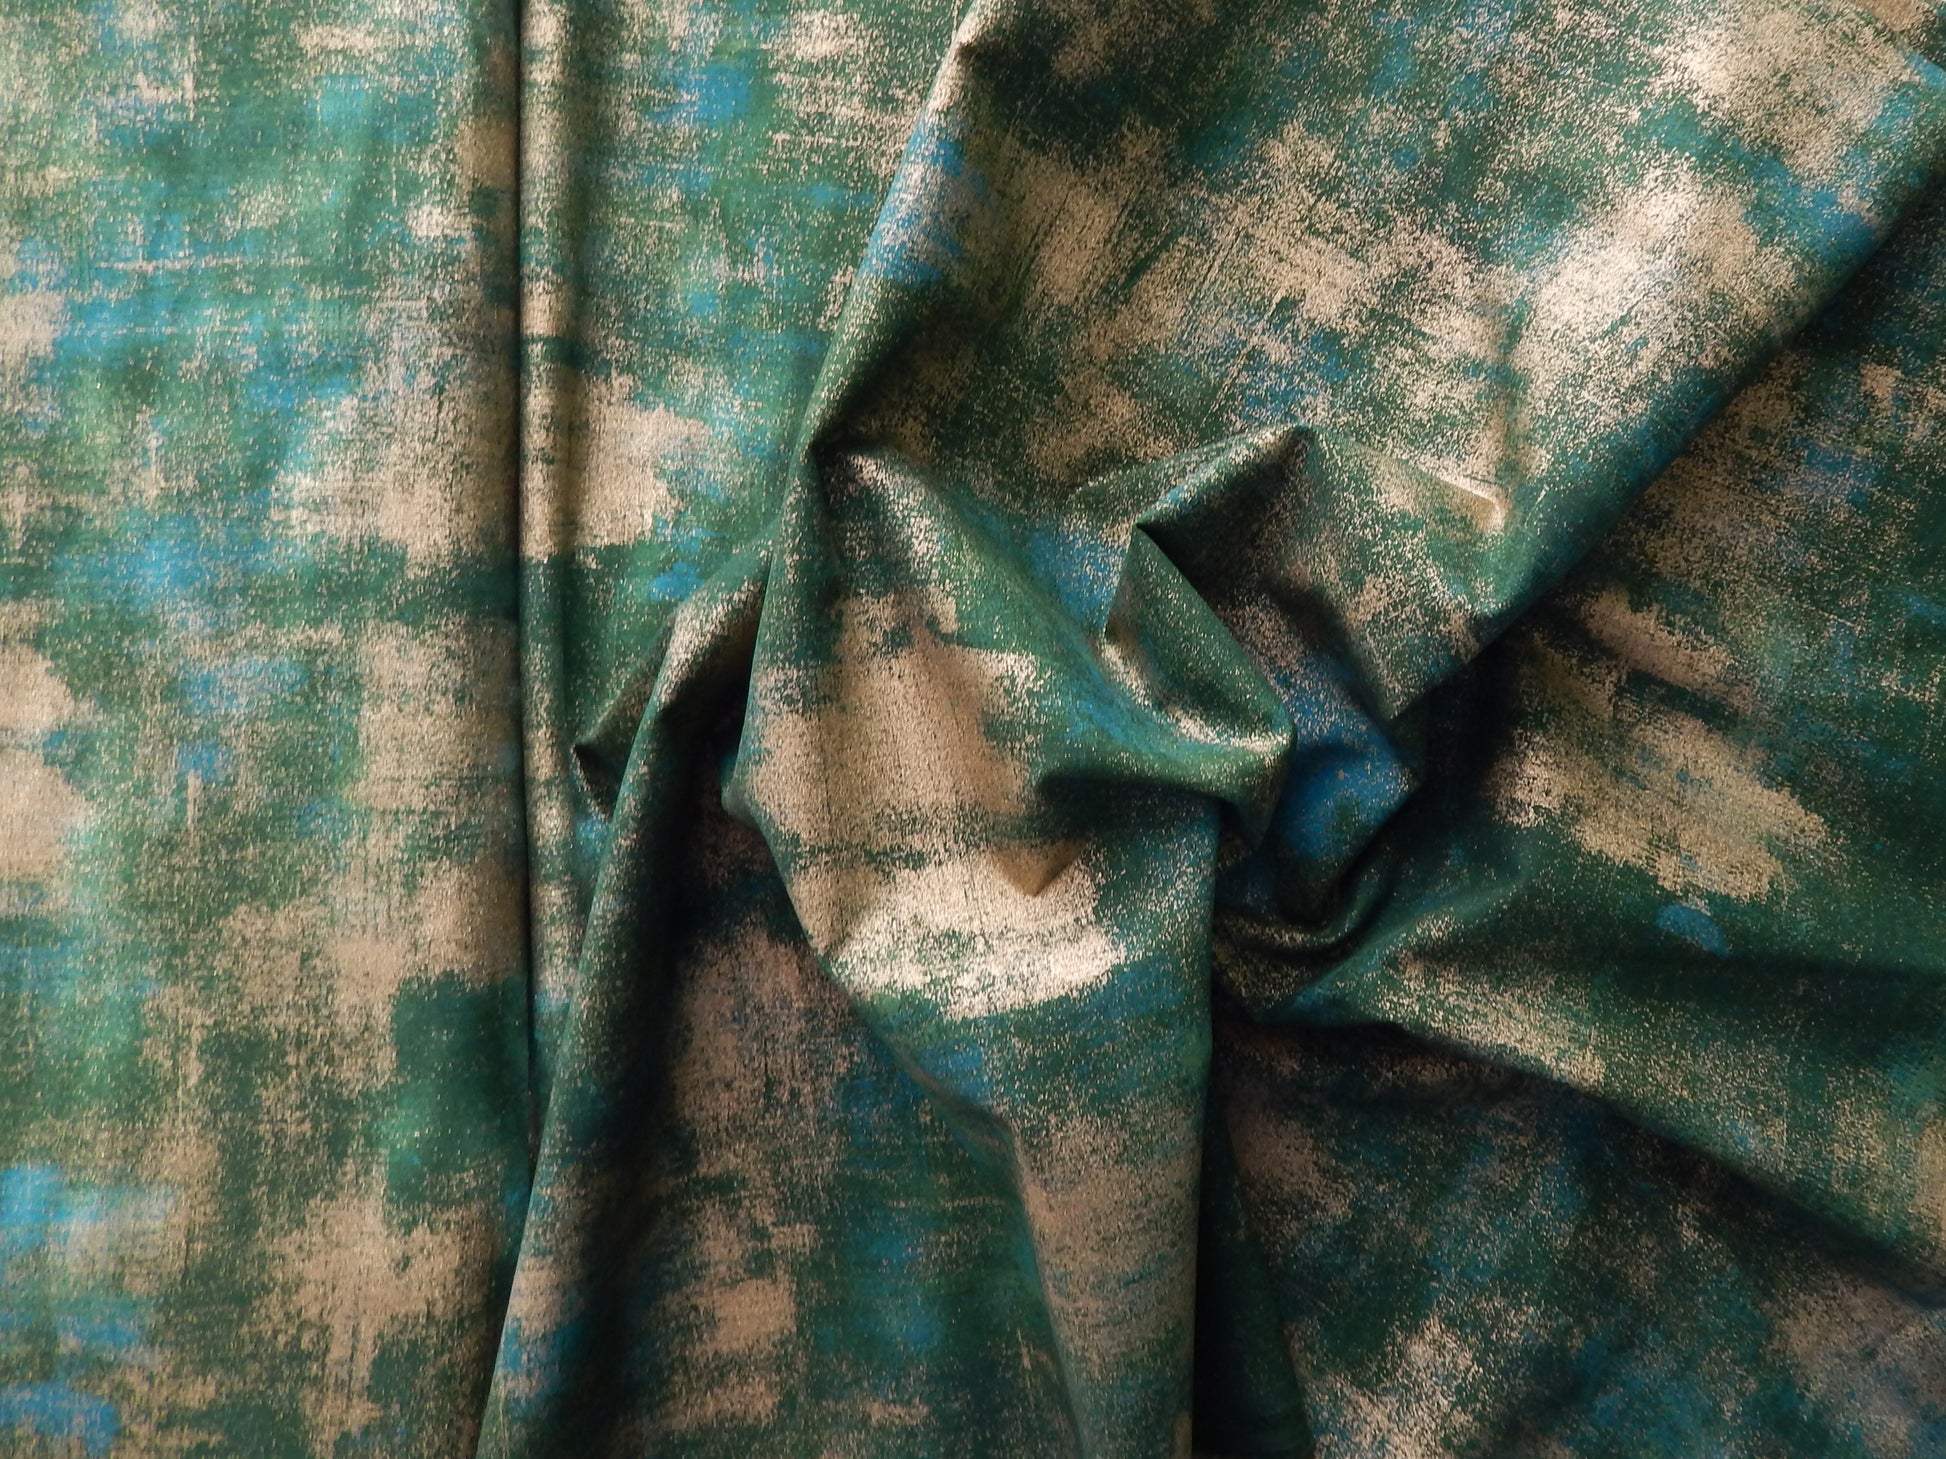 metallic gold and green cotton fabric